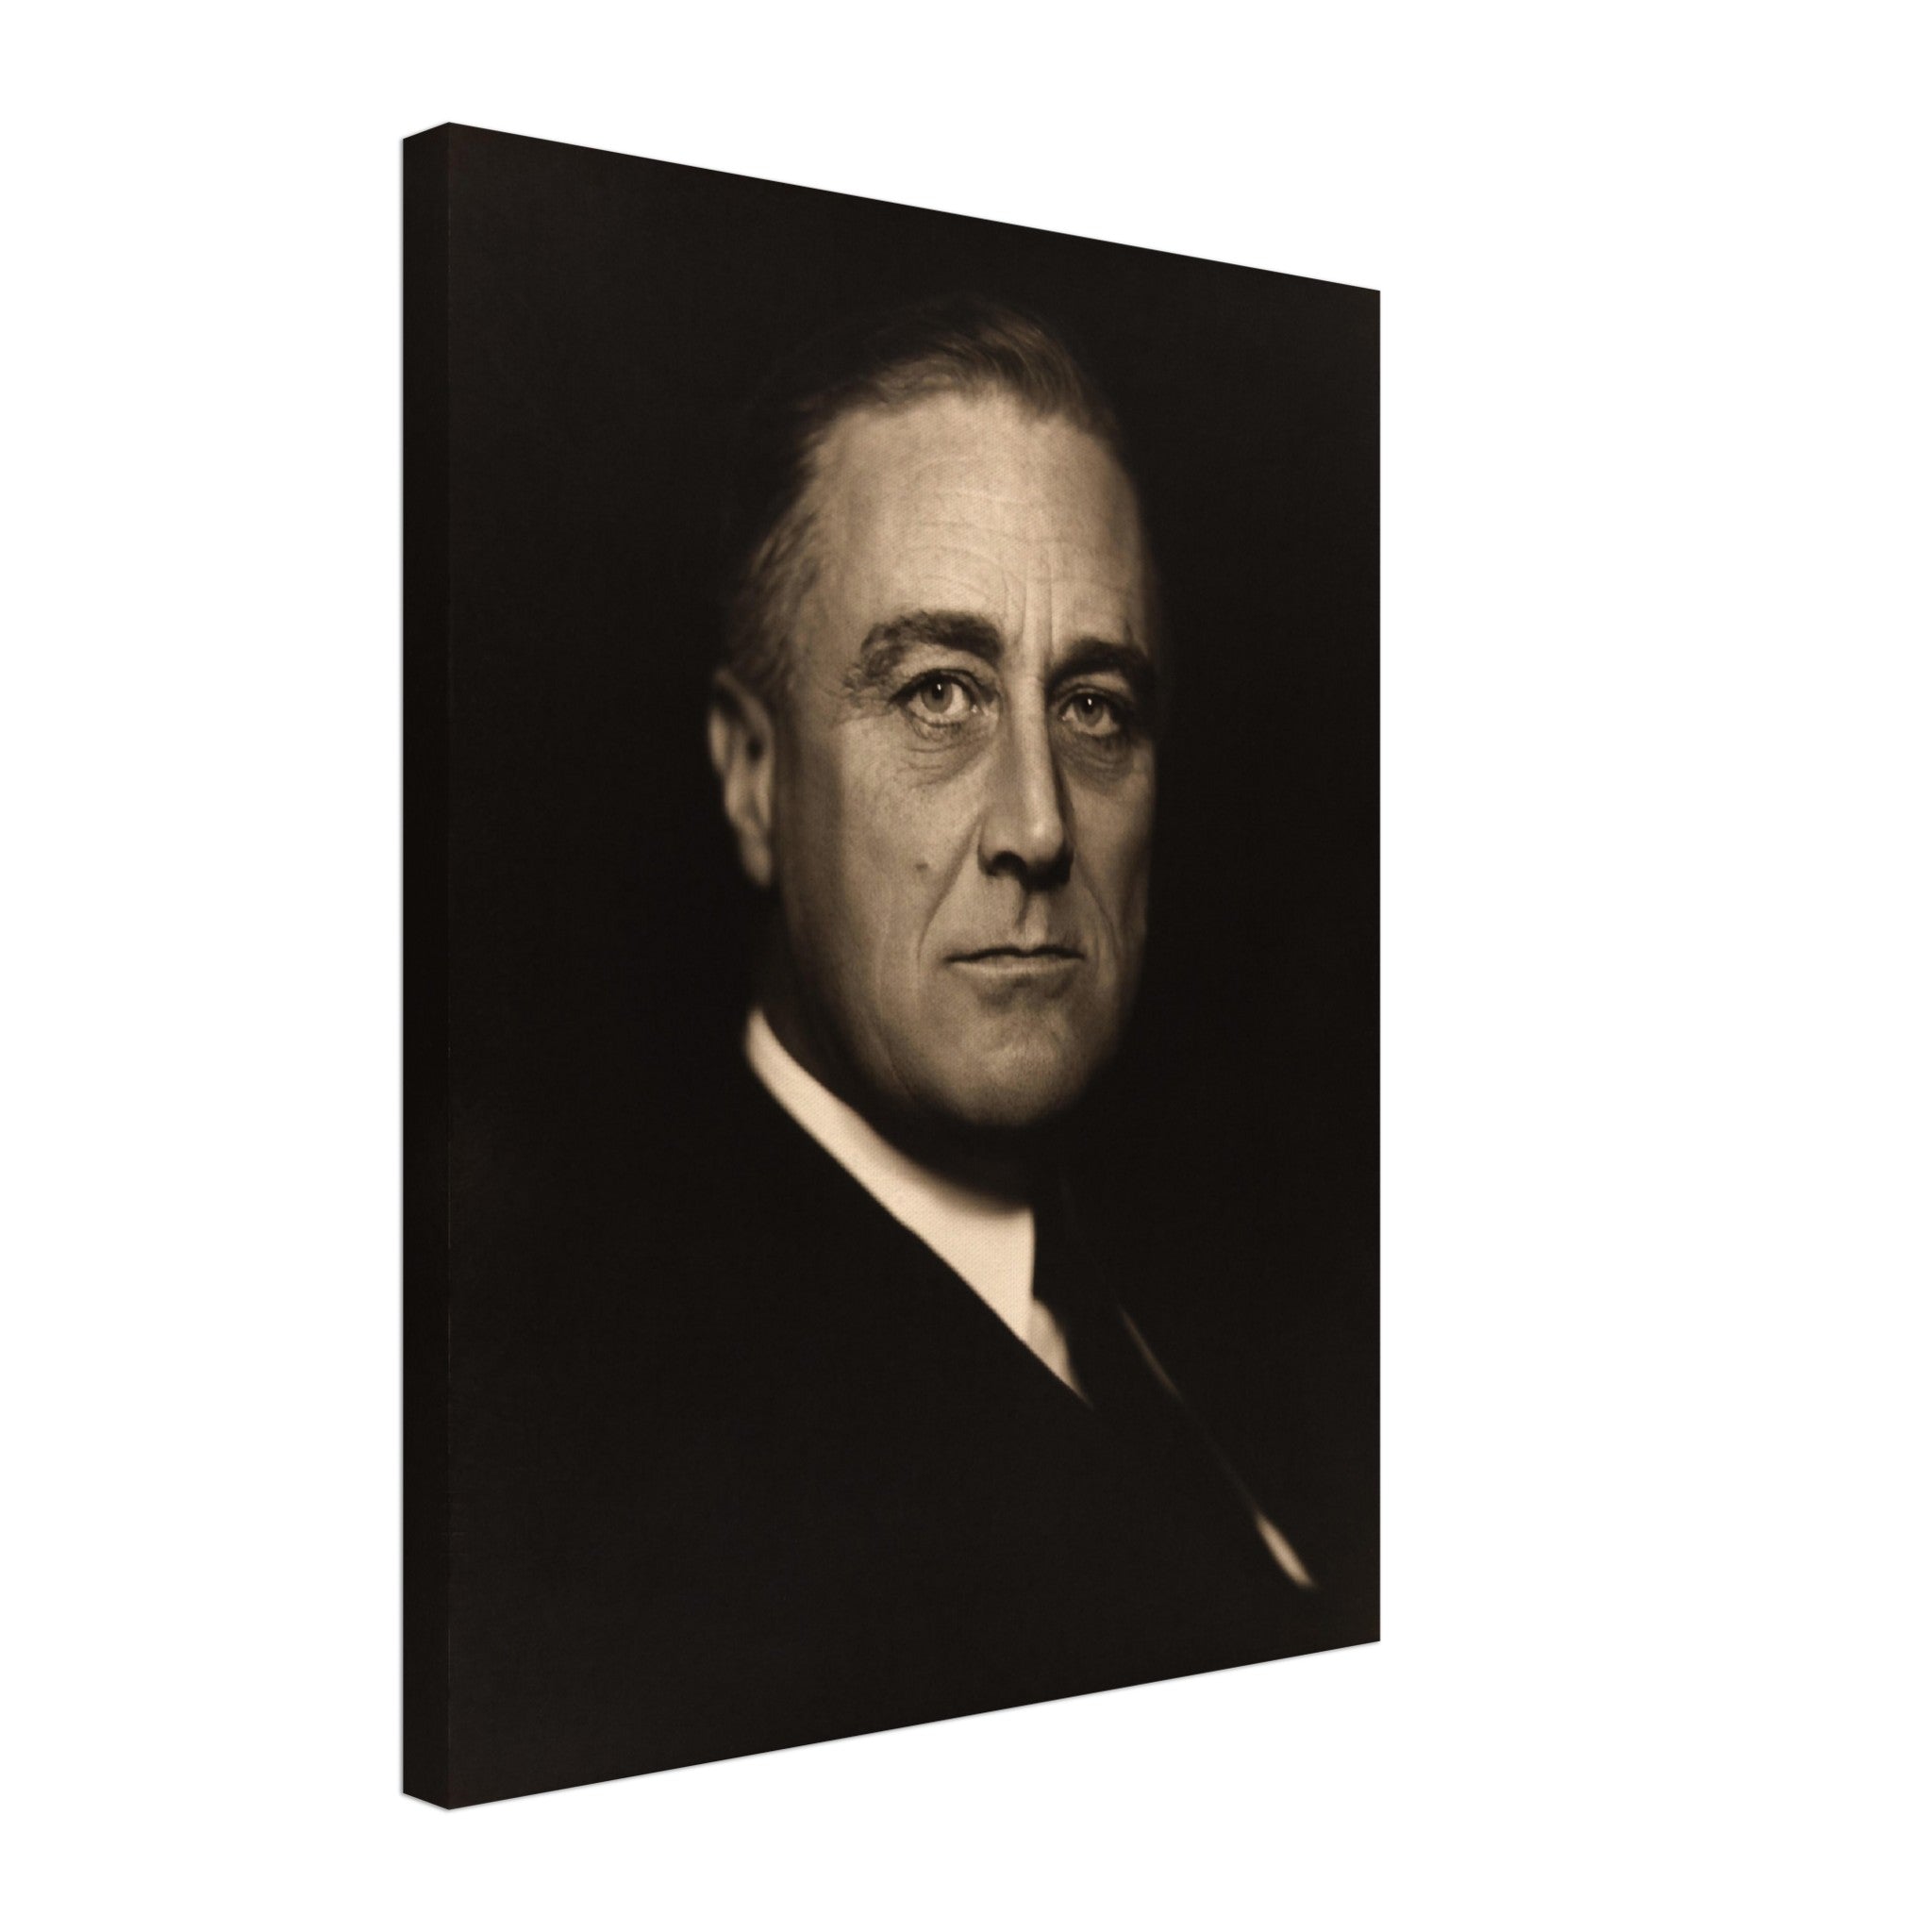 Fdr Canvas, Greatest American President Of The 20th Century, Vintage Photo - Iconic Fdr Canvas Print - 32nd Potus - WallArtPrints4U